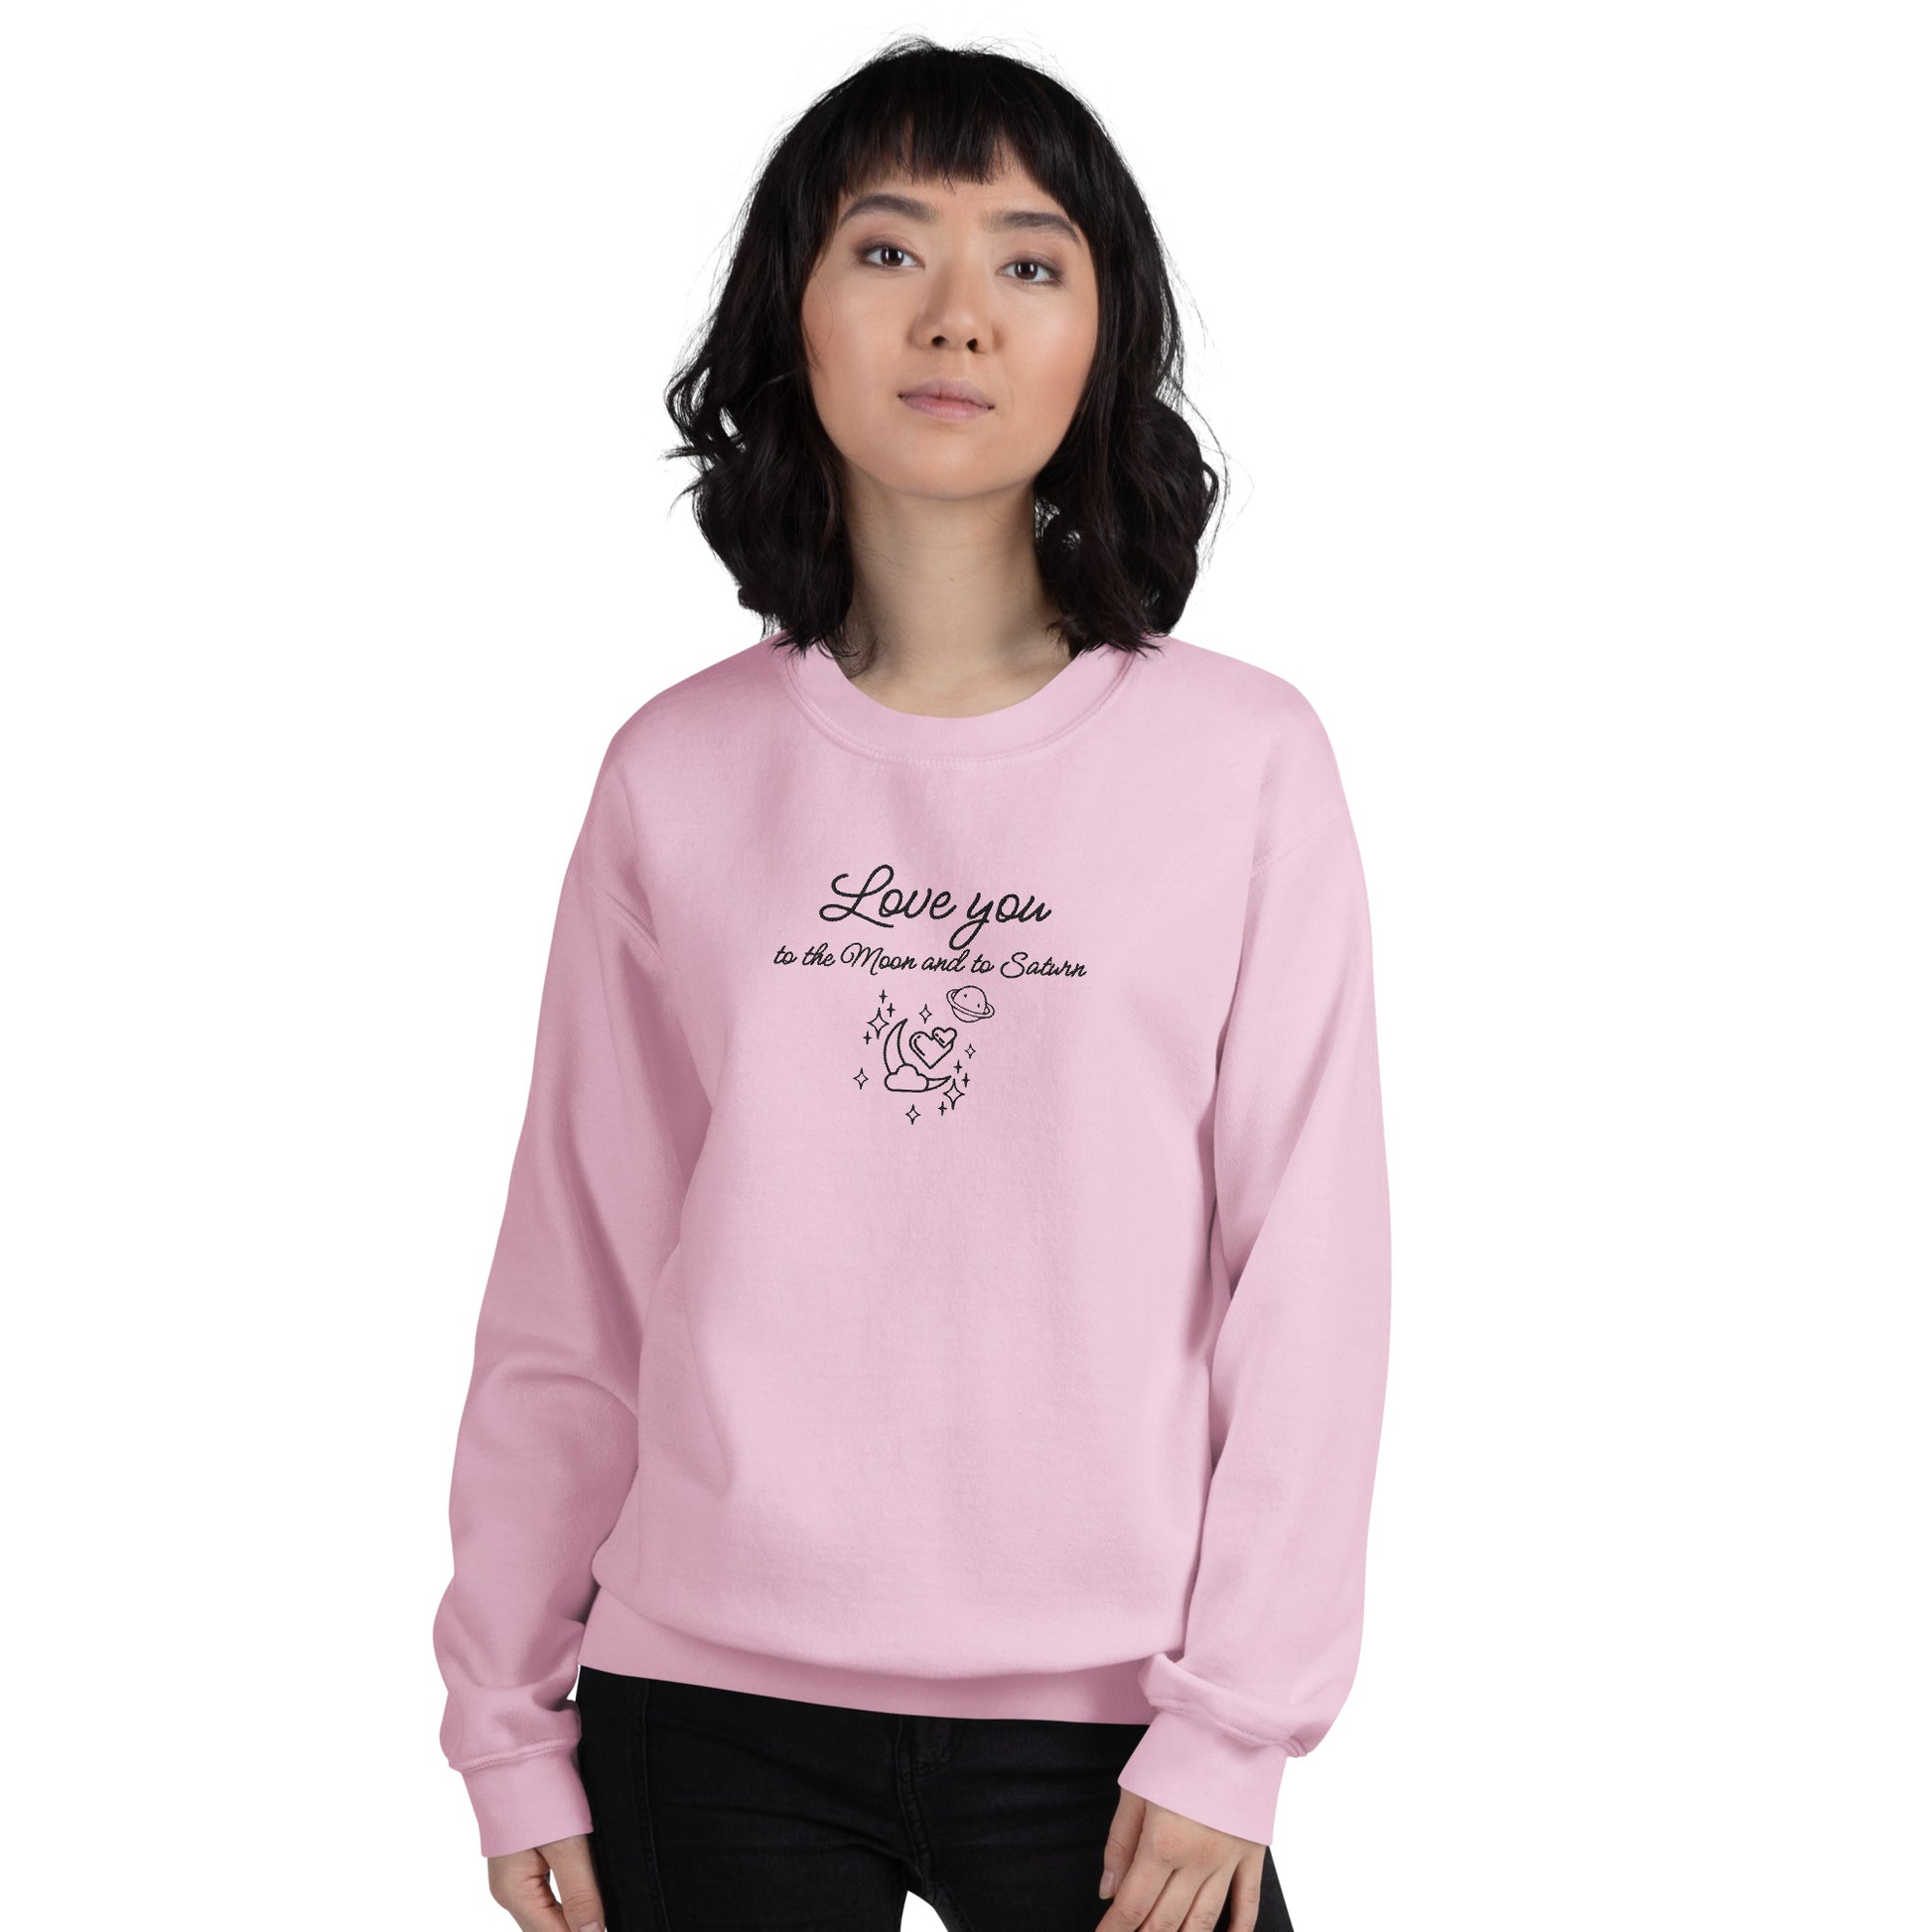 Moon and Saturn Embroidered Sweatshirt Light Pink